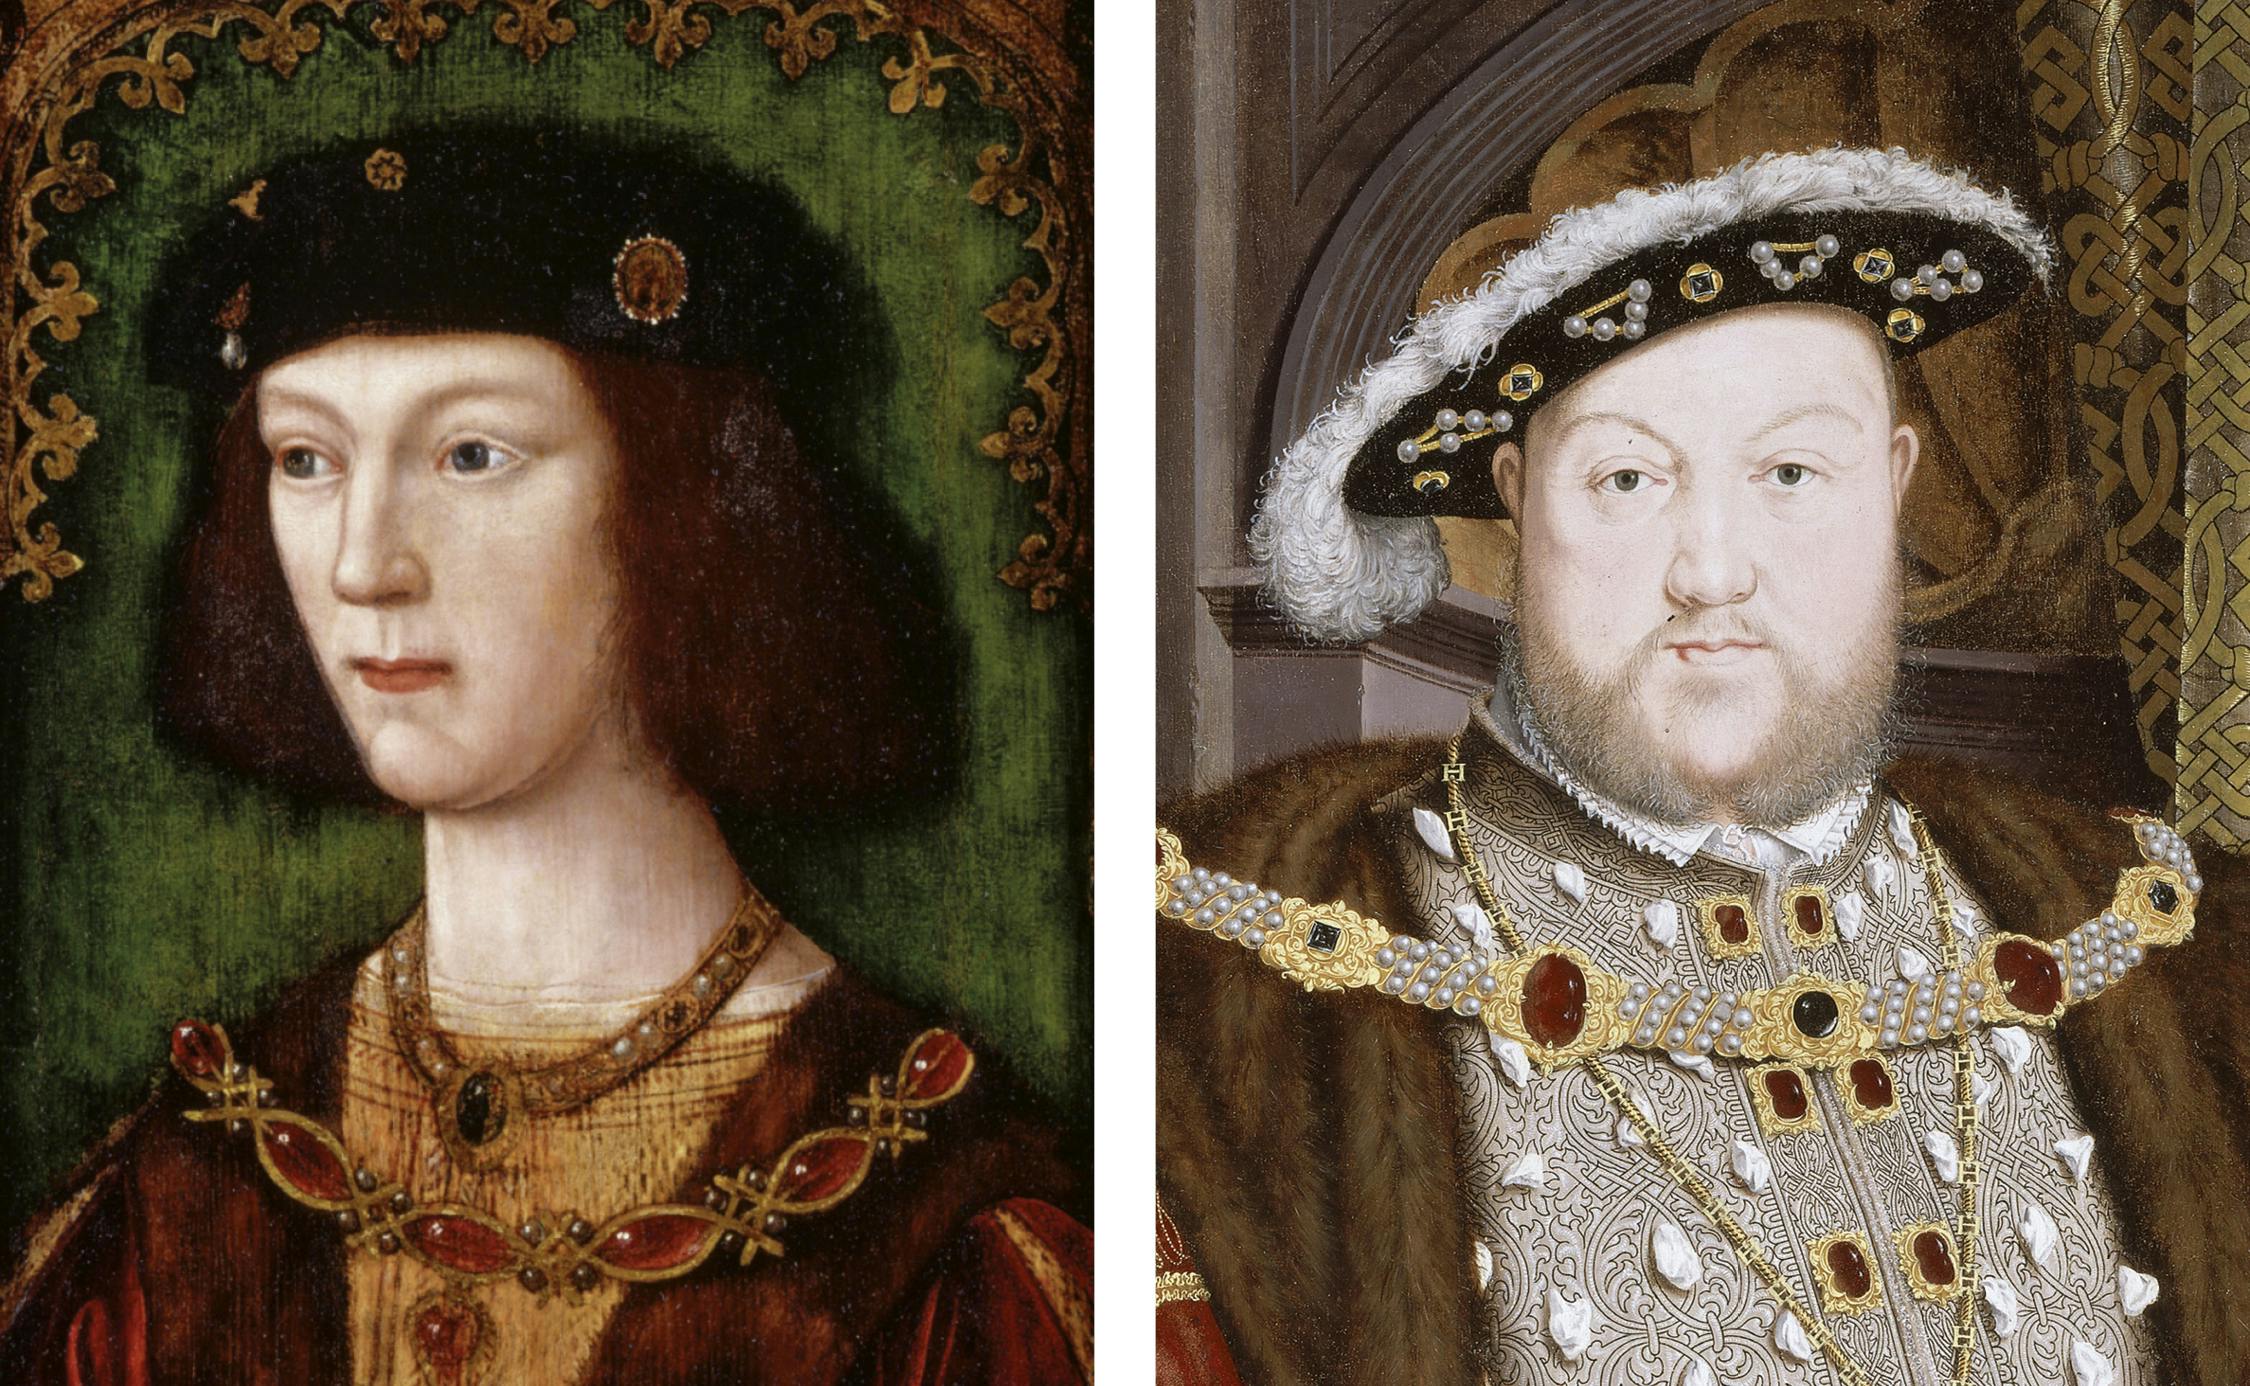 Two portraits of elaborately dressed men in hats, jewels, luxurious fabrics.